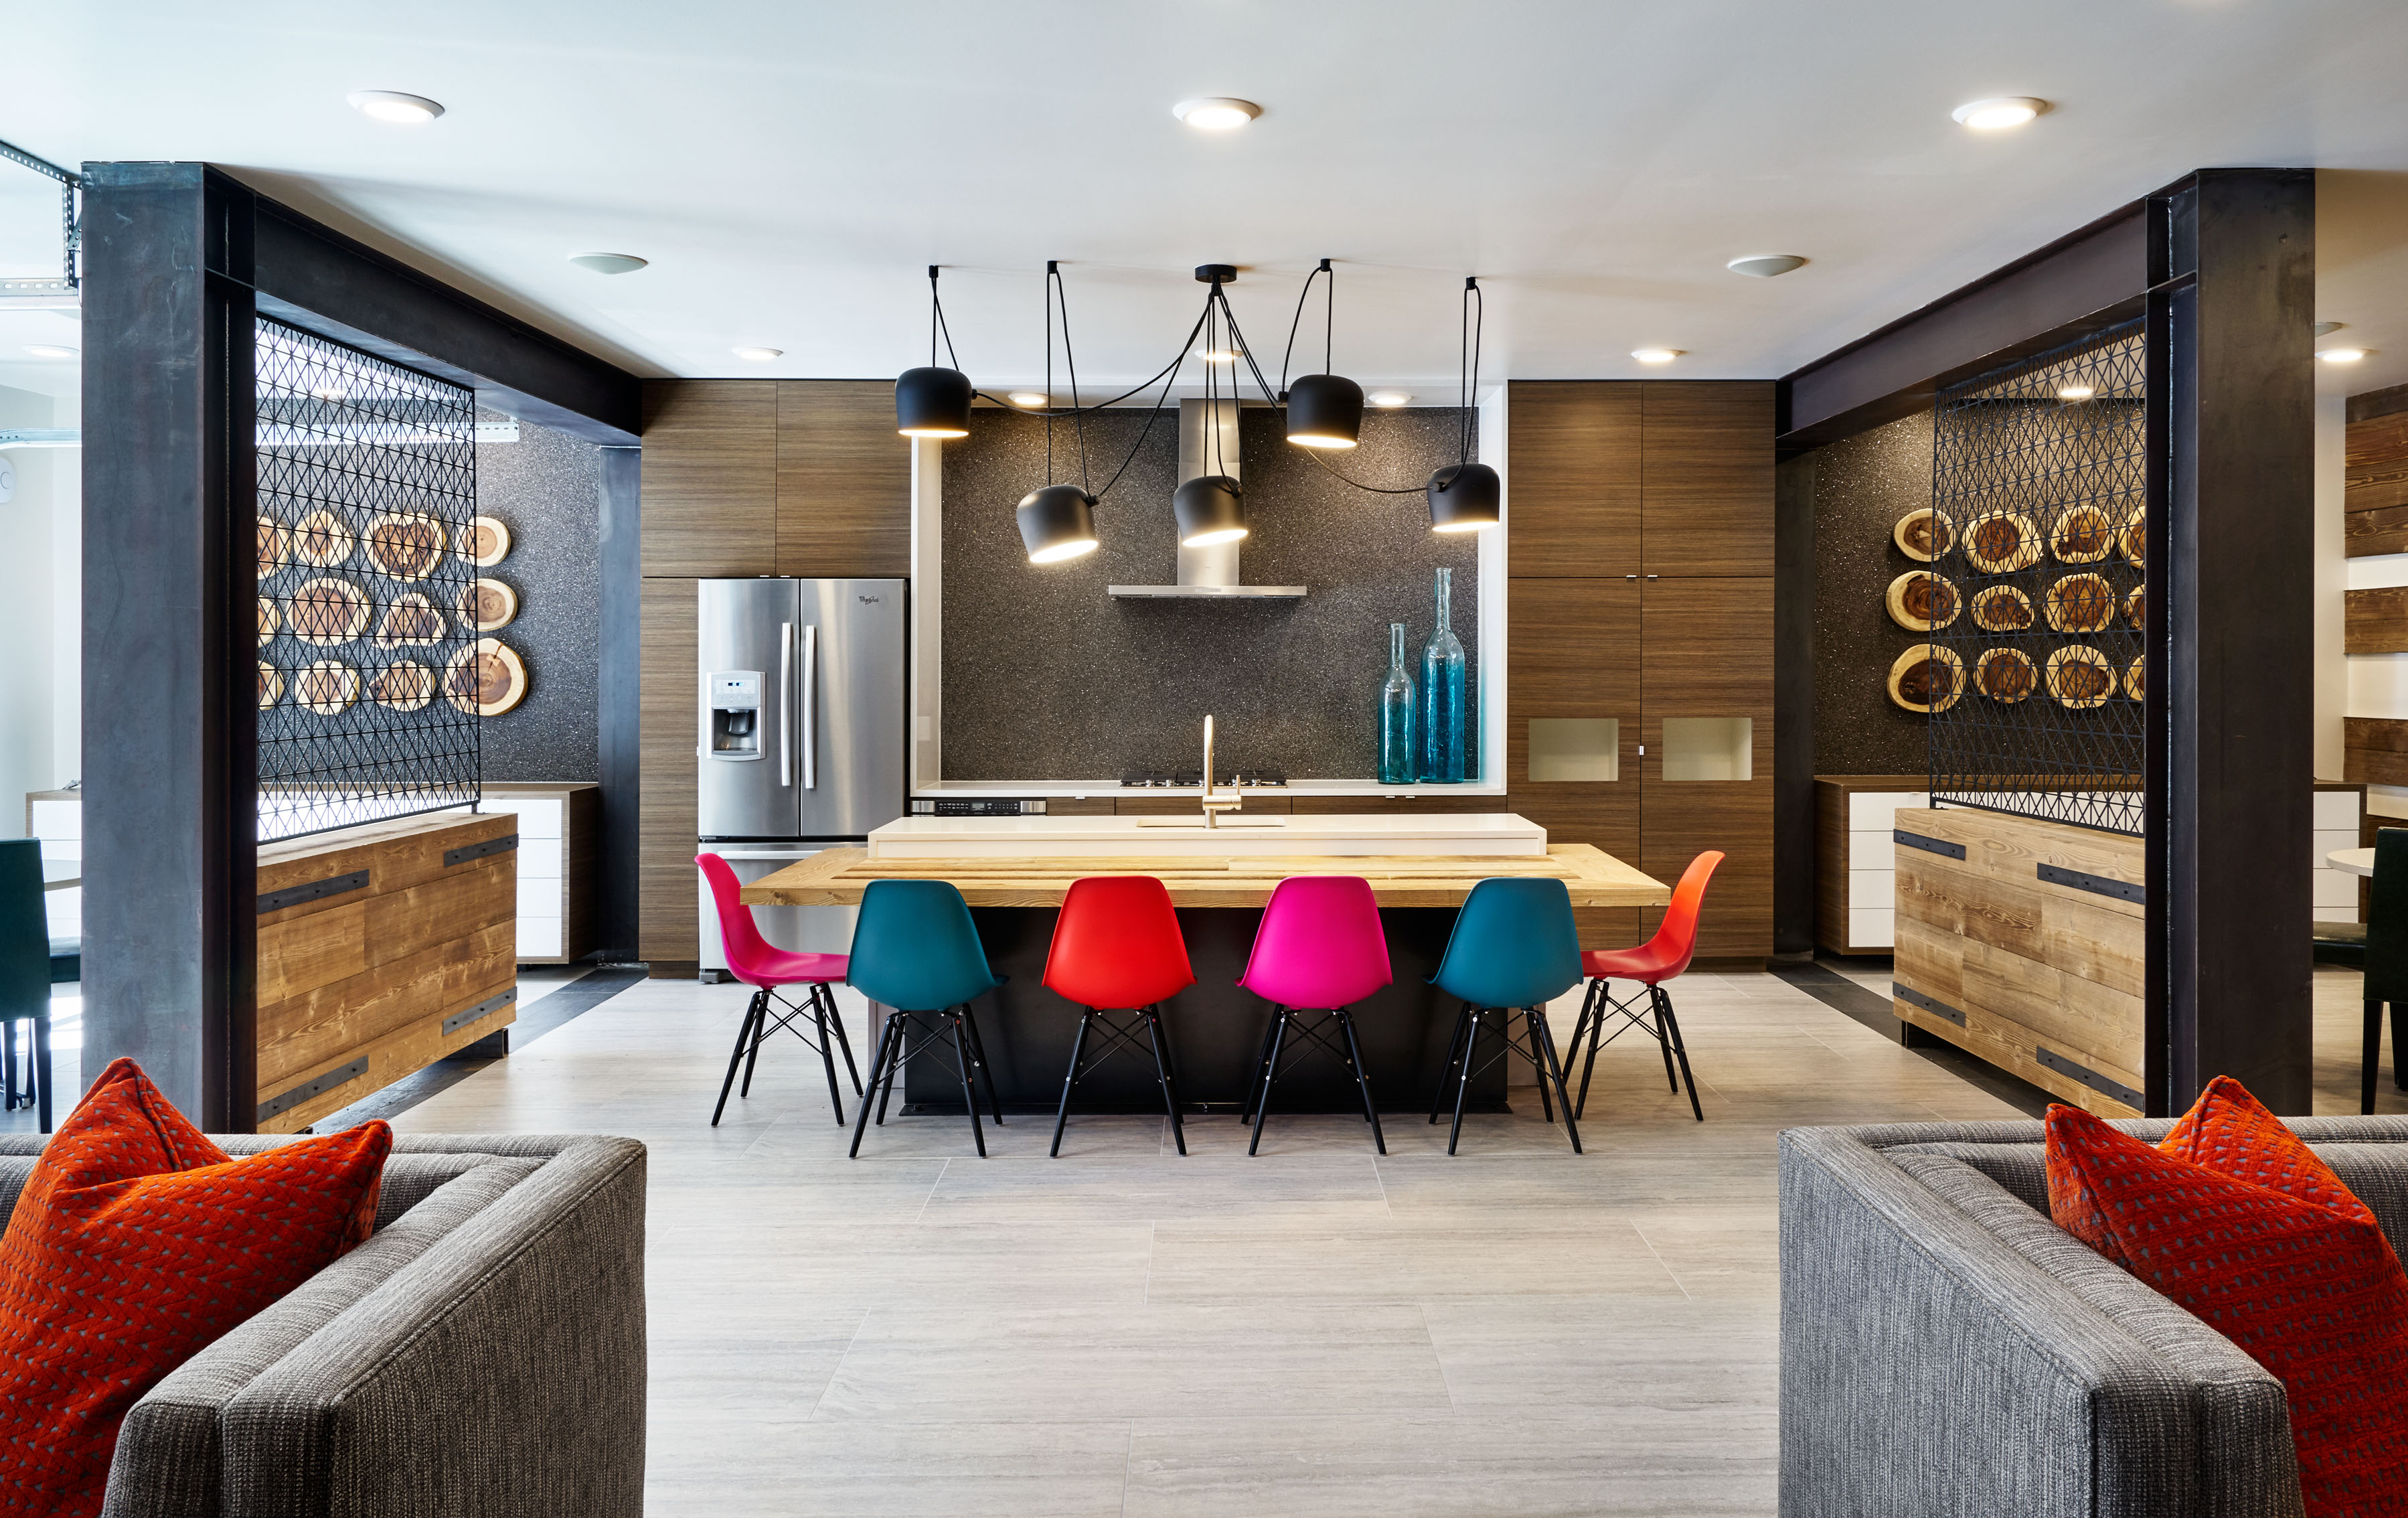 Portland Interior Design Firm Uses Creative Color Solutions for Way